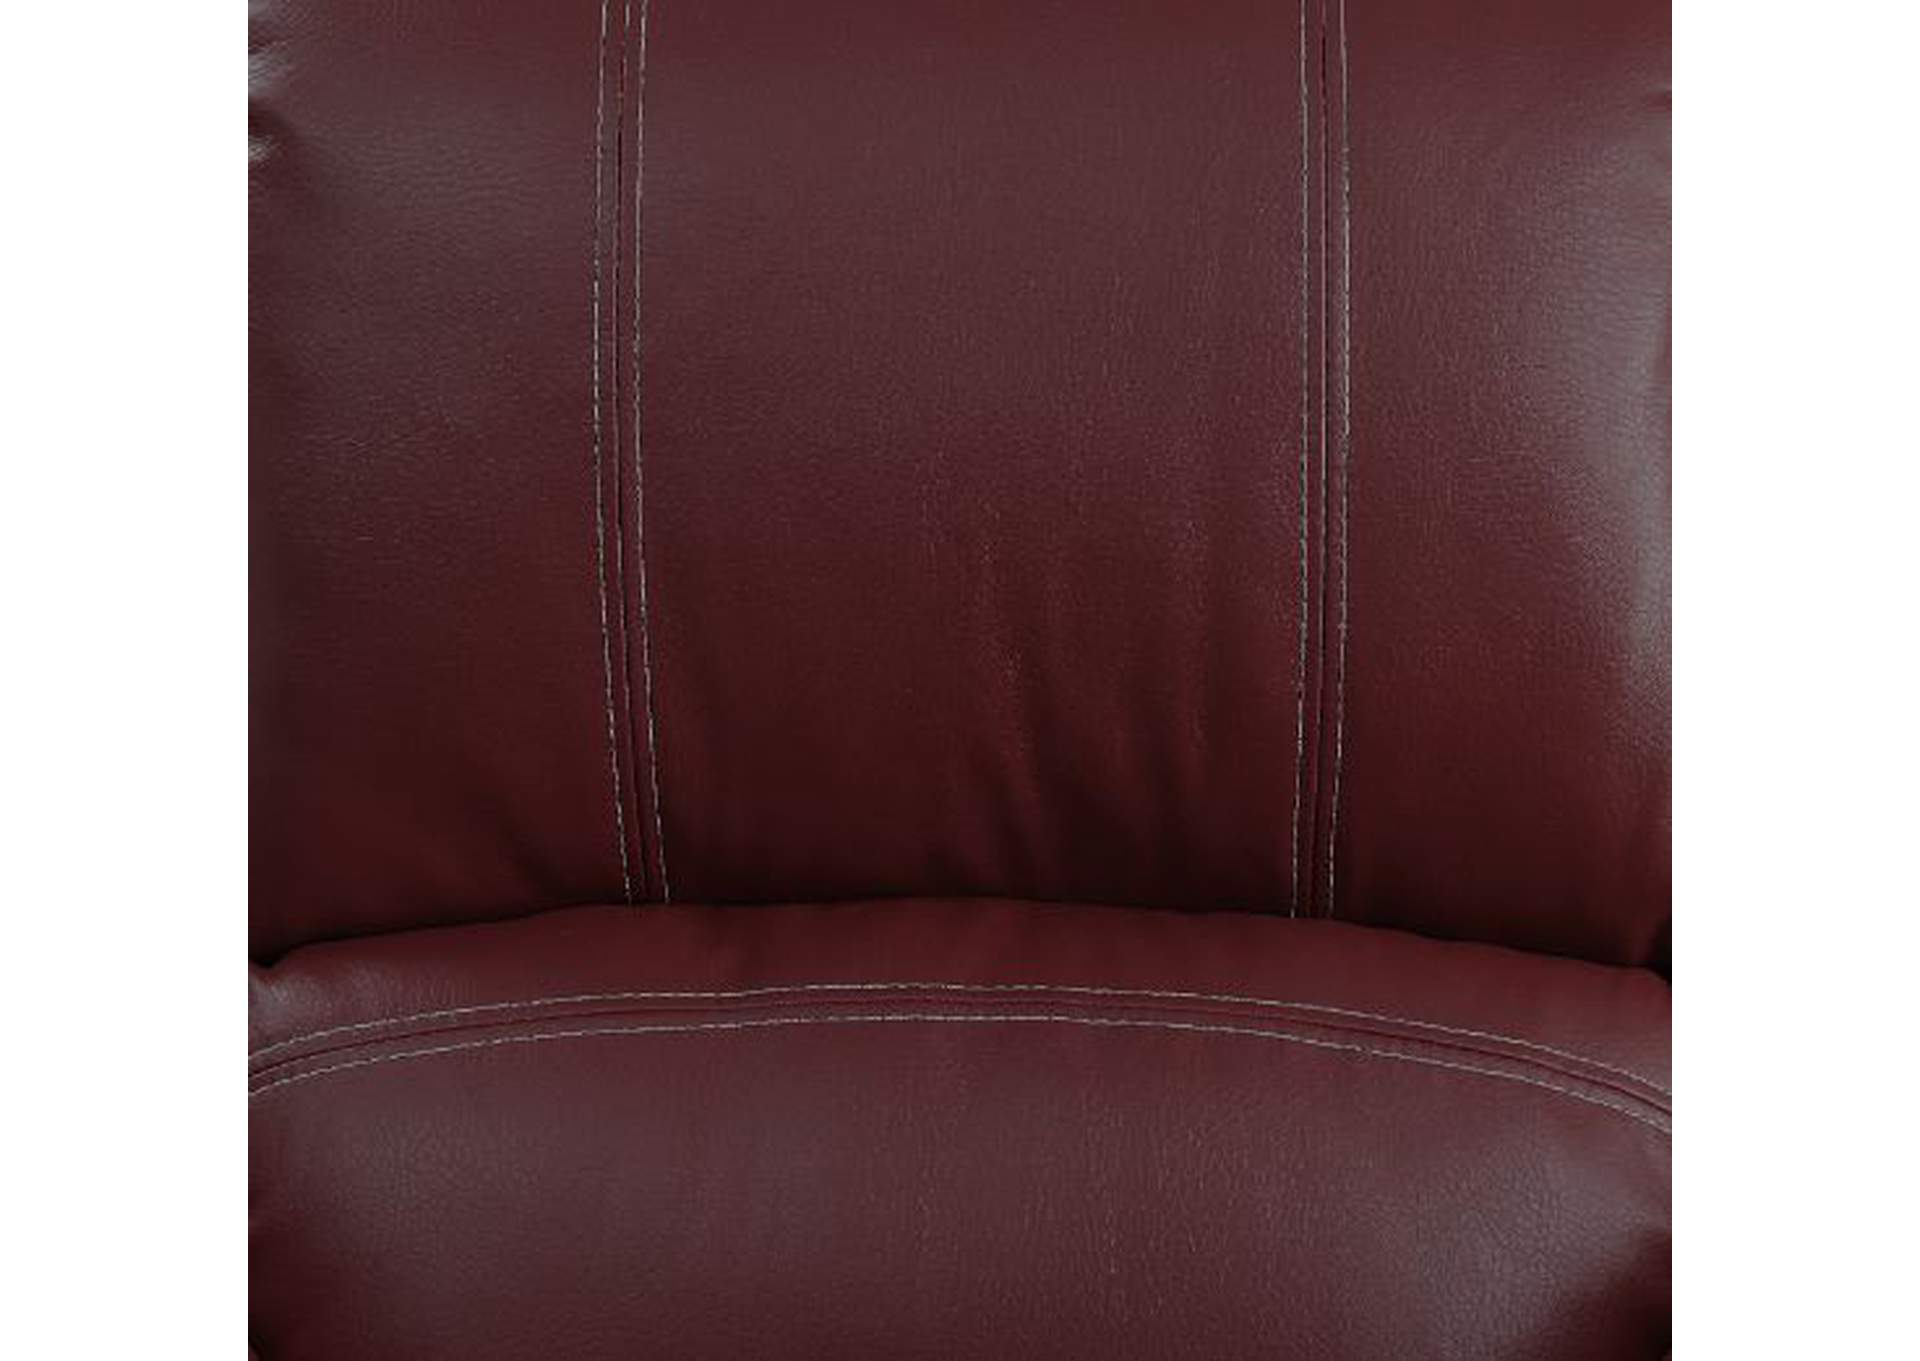 Red Recliner,Acme